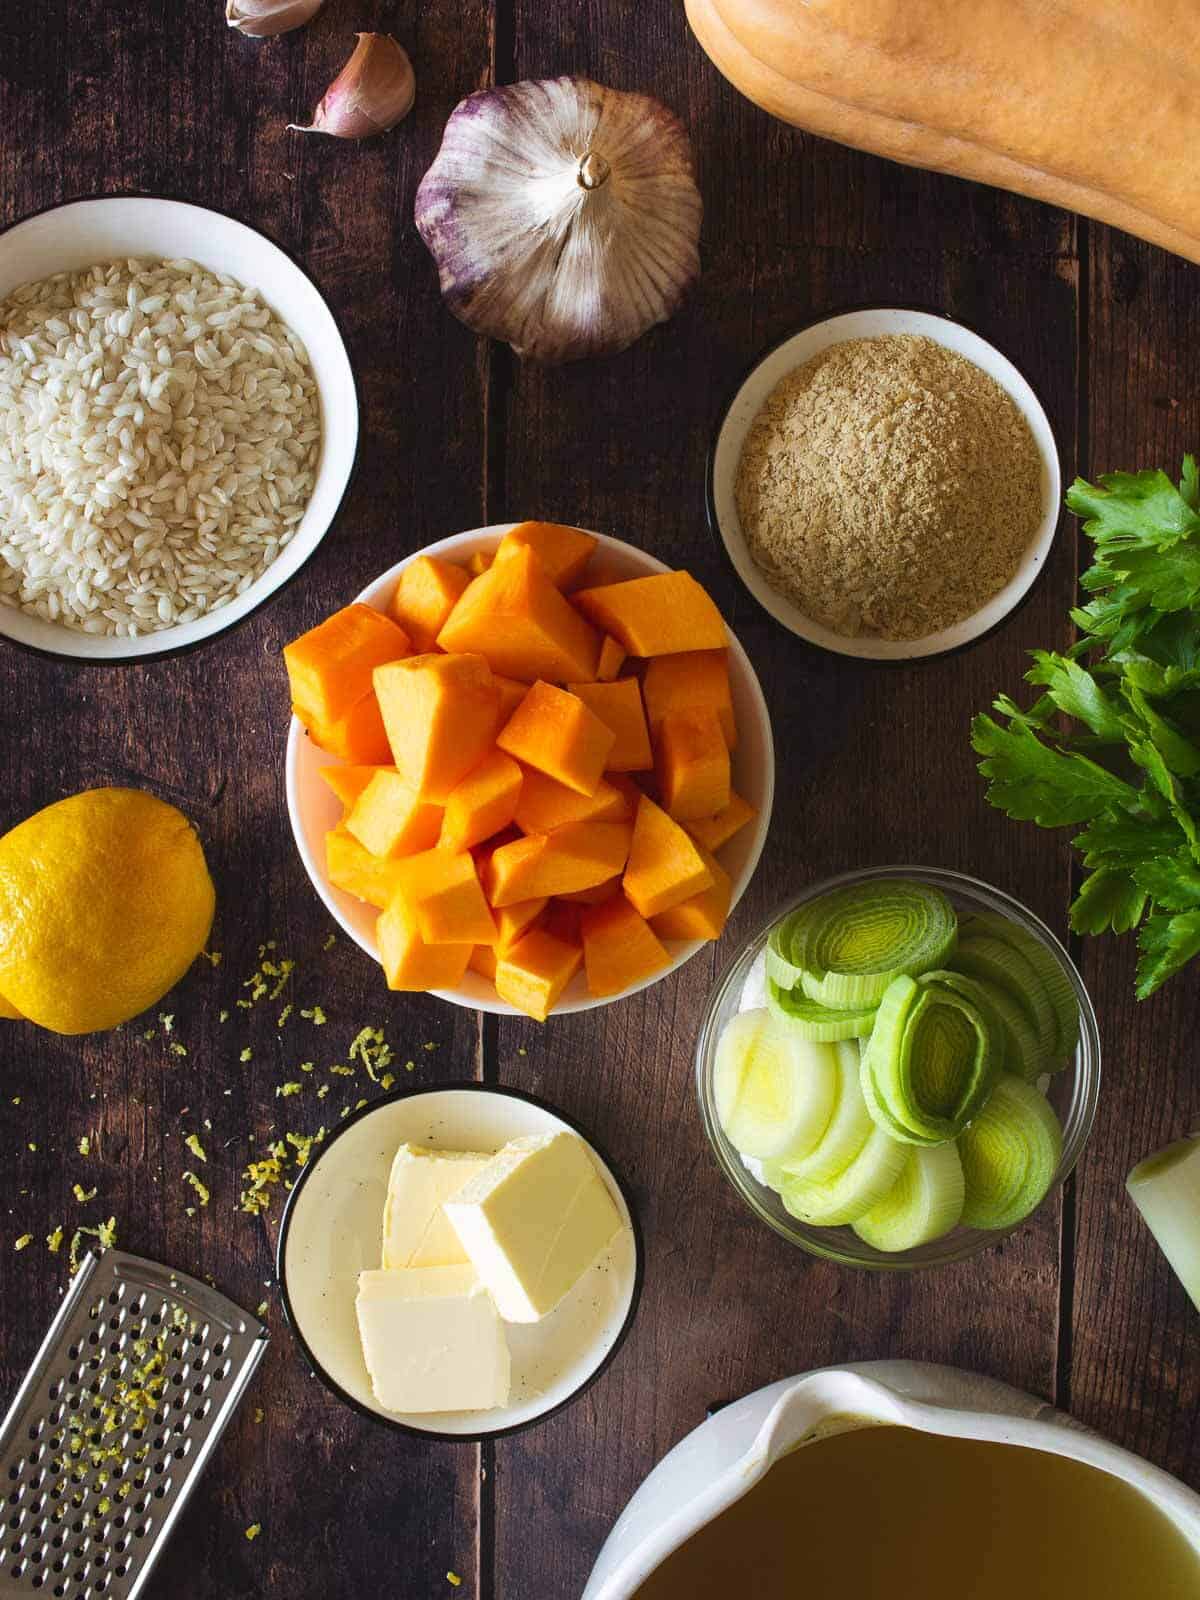 butternut squash risotto ingredients on a wooden table.